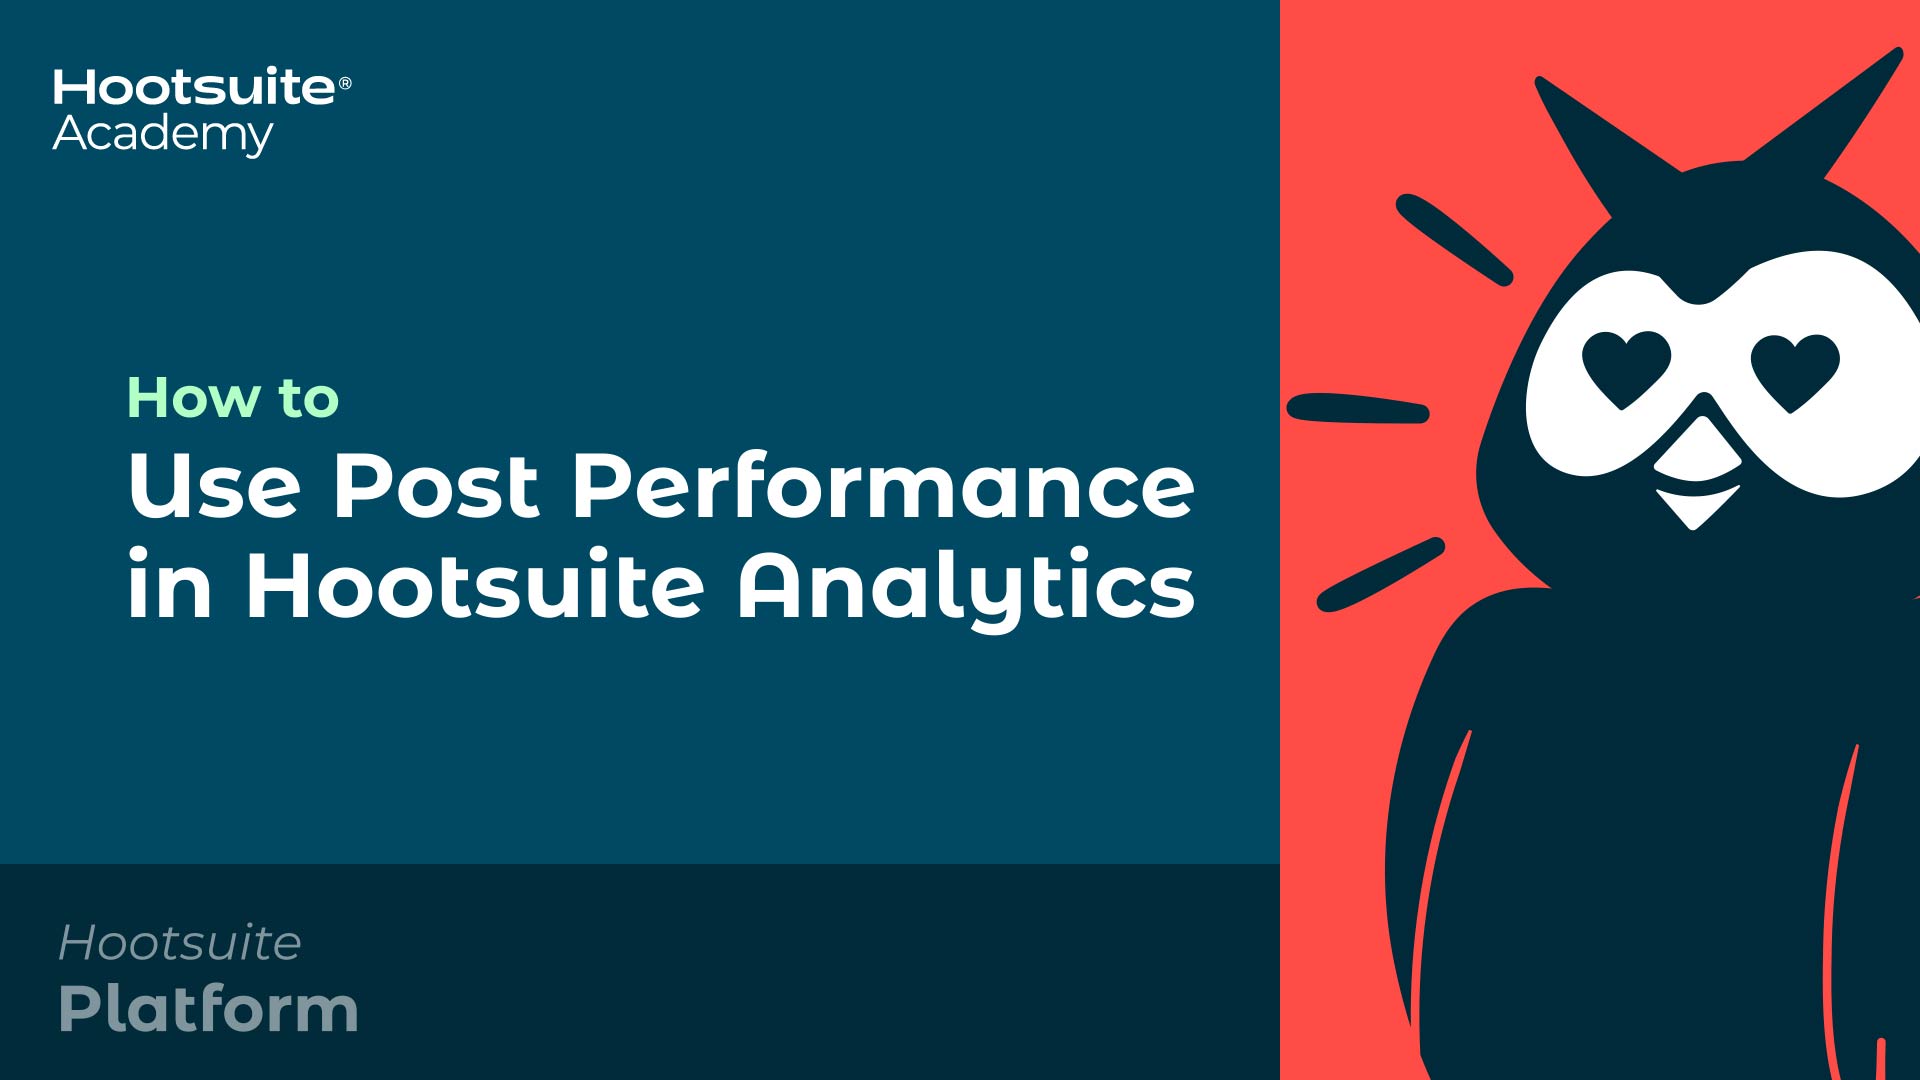 How to use post performance in hootsuite analytics video.